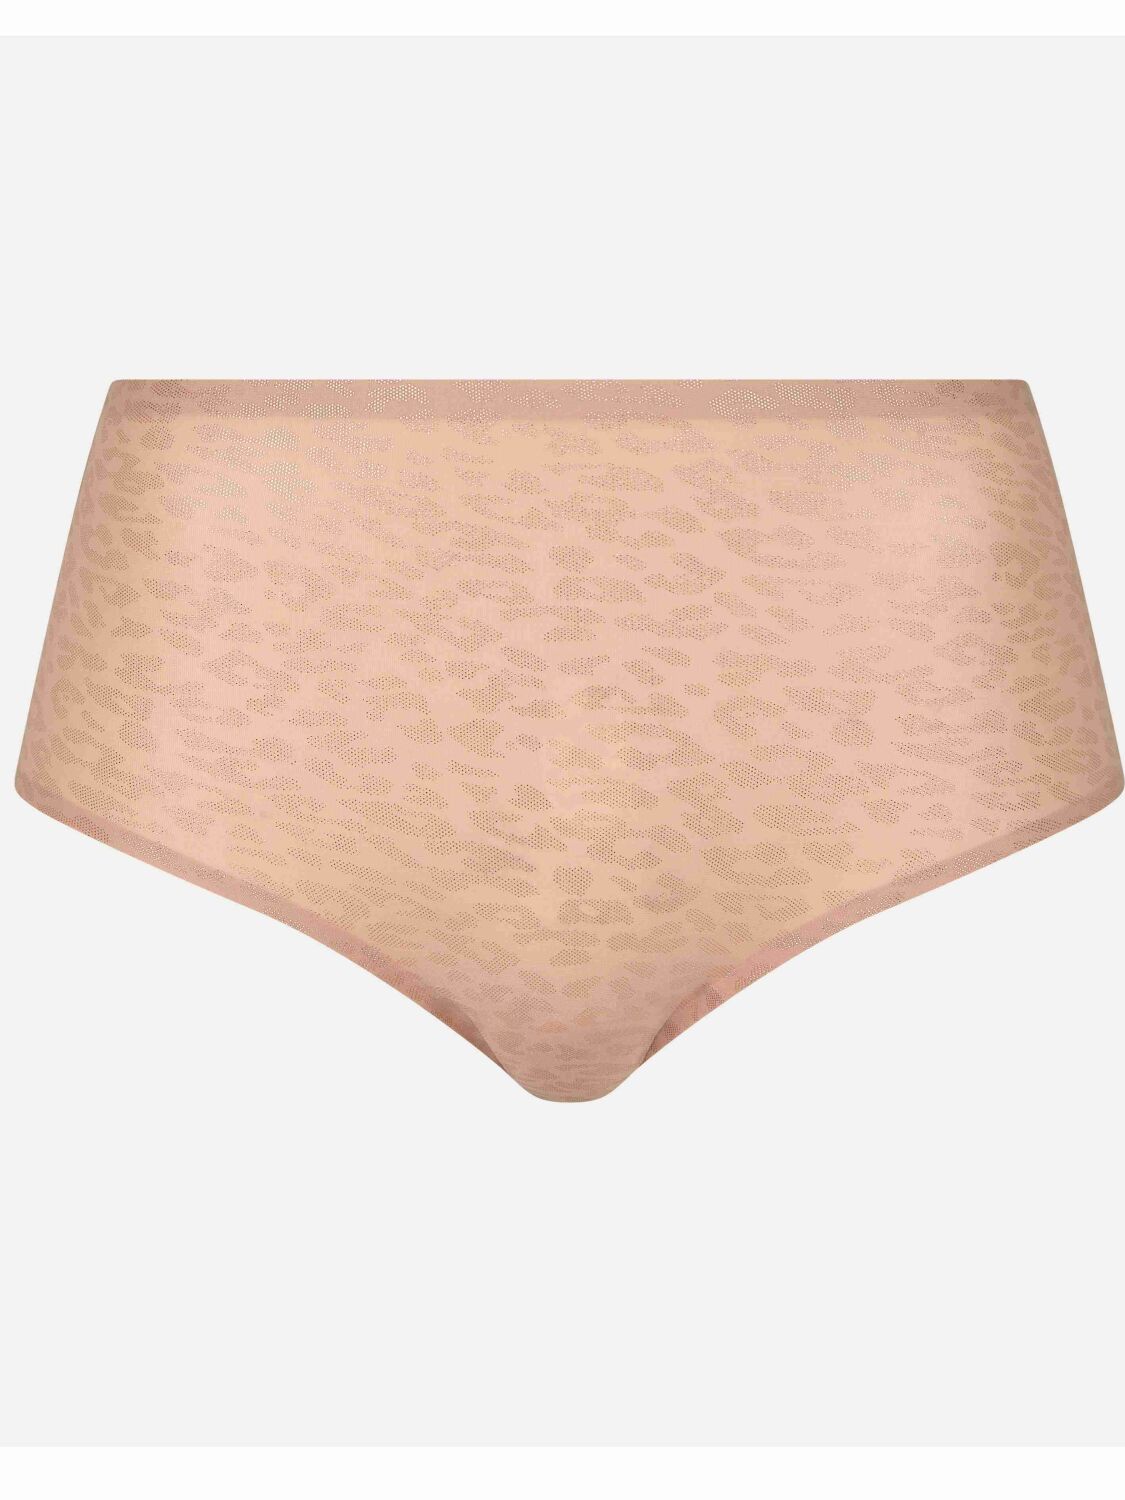 Chantelle Taillenslip ONE SIZE SoftStretch Farbe Leo Shimmer Print